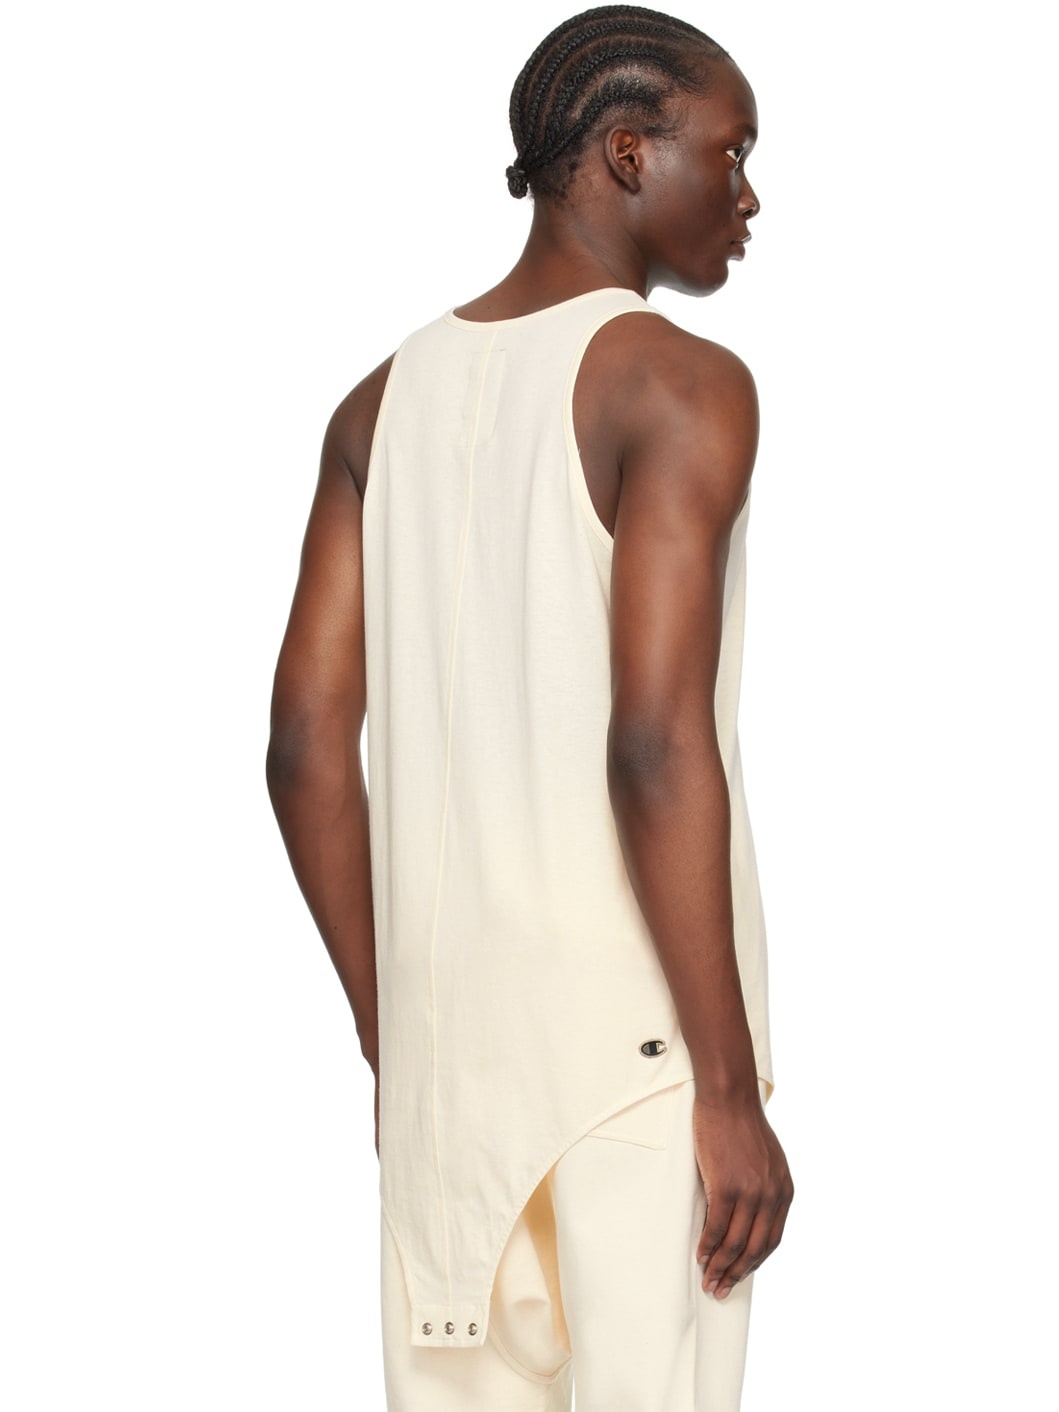 Off-White Champion Edition Basketball Tank Top - 3